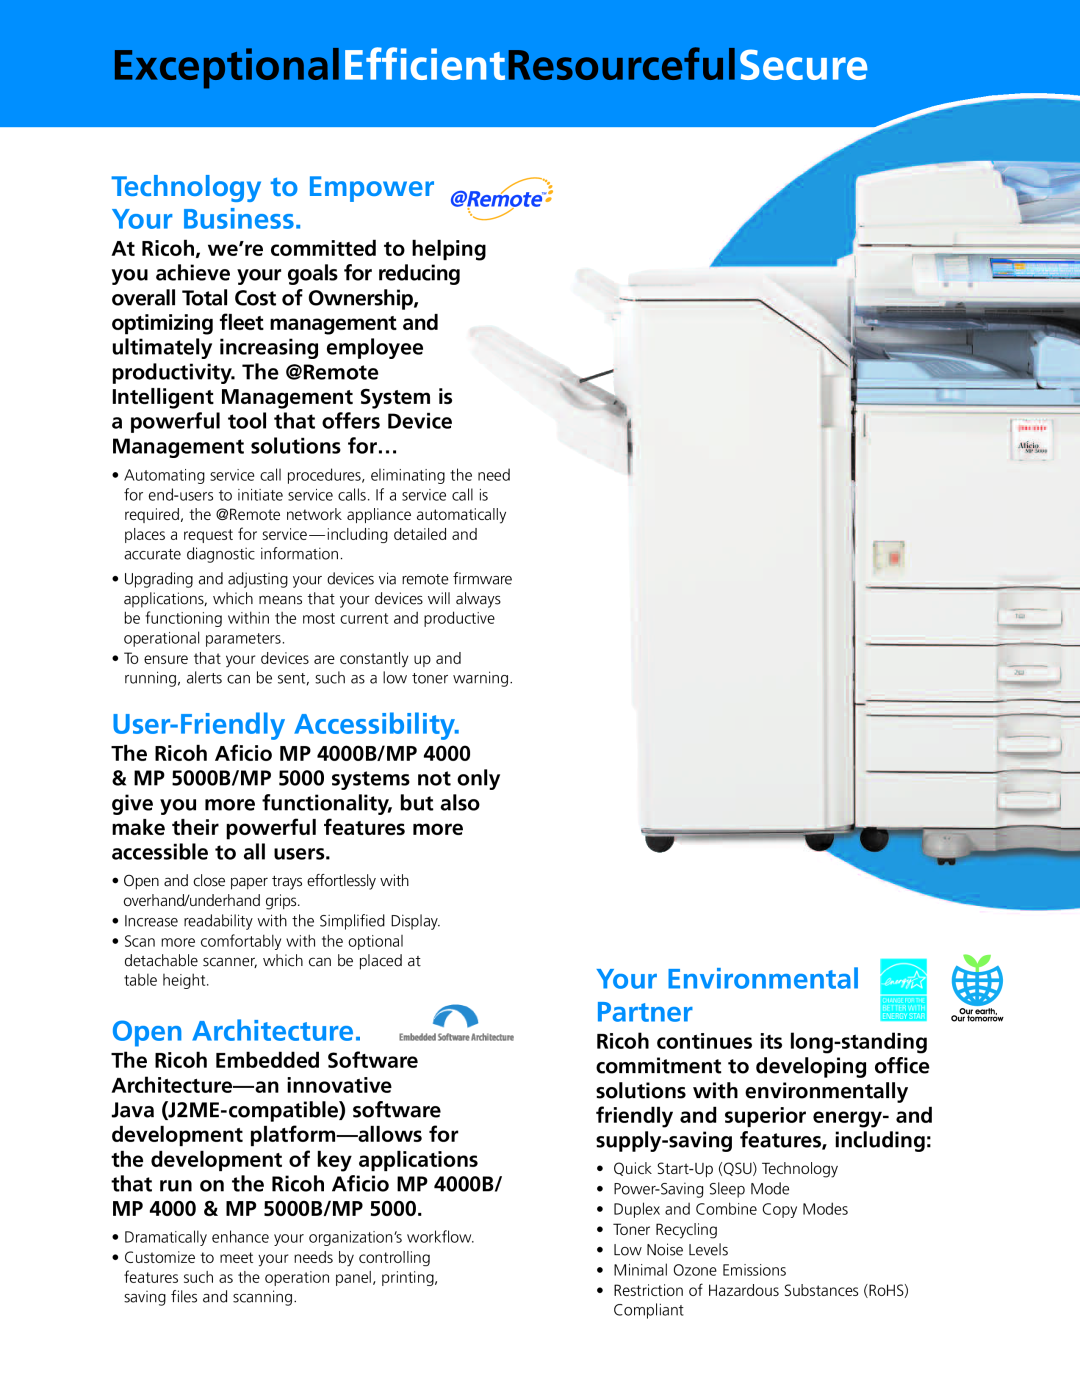 Ricoh MP 4000B, MP 5000B manual Technology to Empower Your Business, User-Friendly Accessibility, Open Architecture 